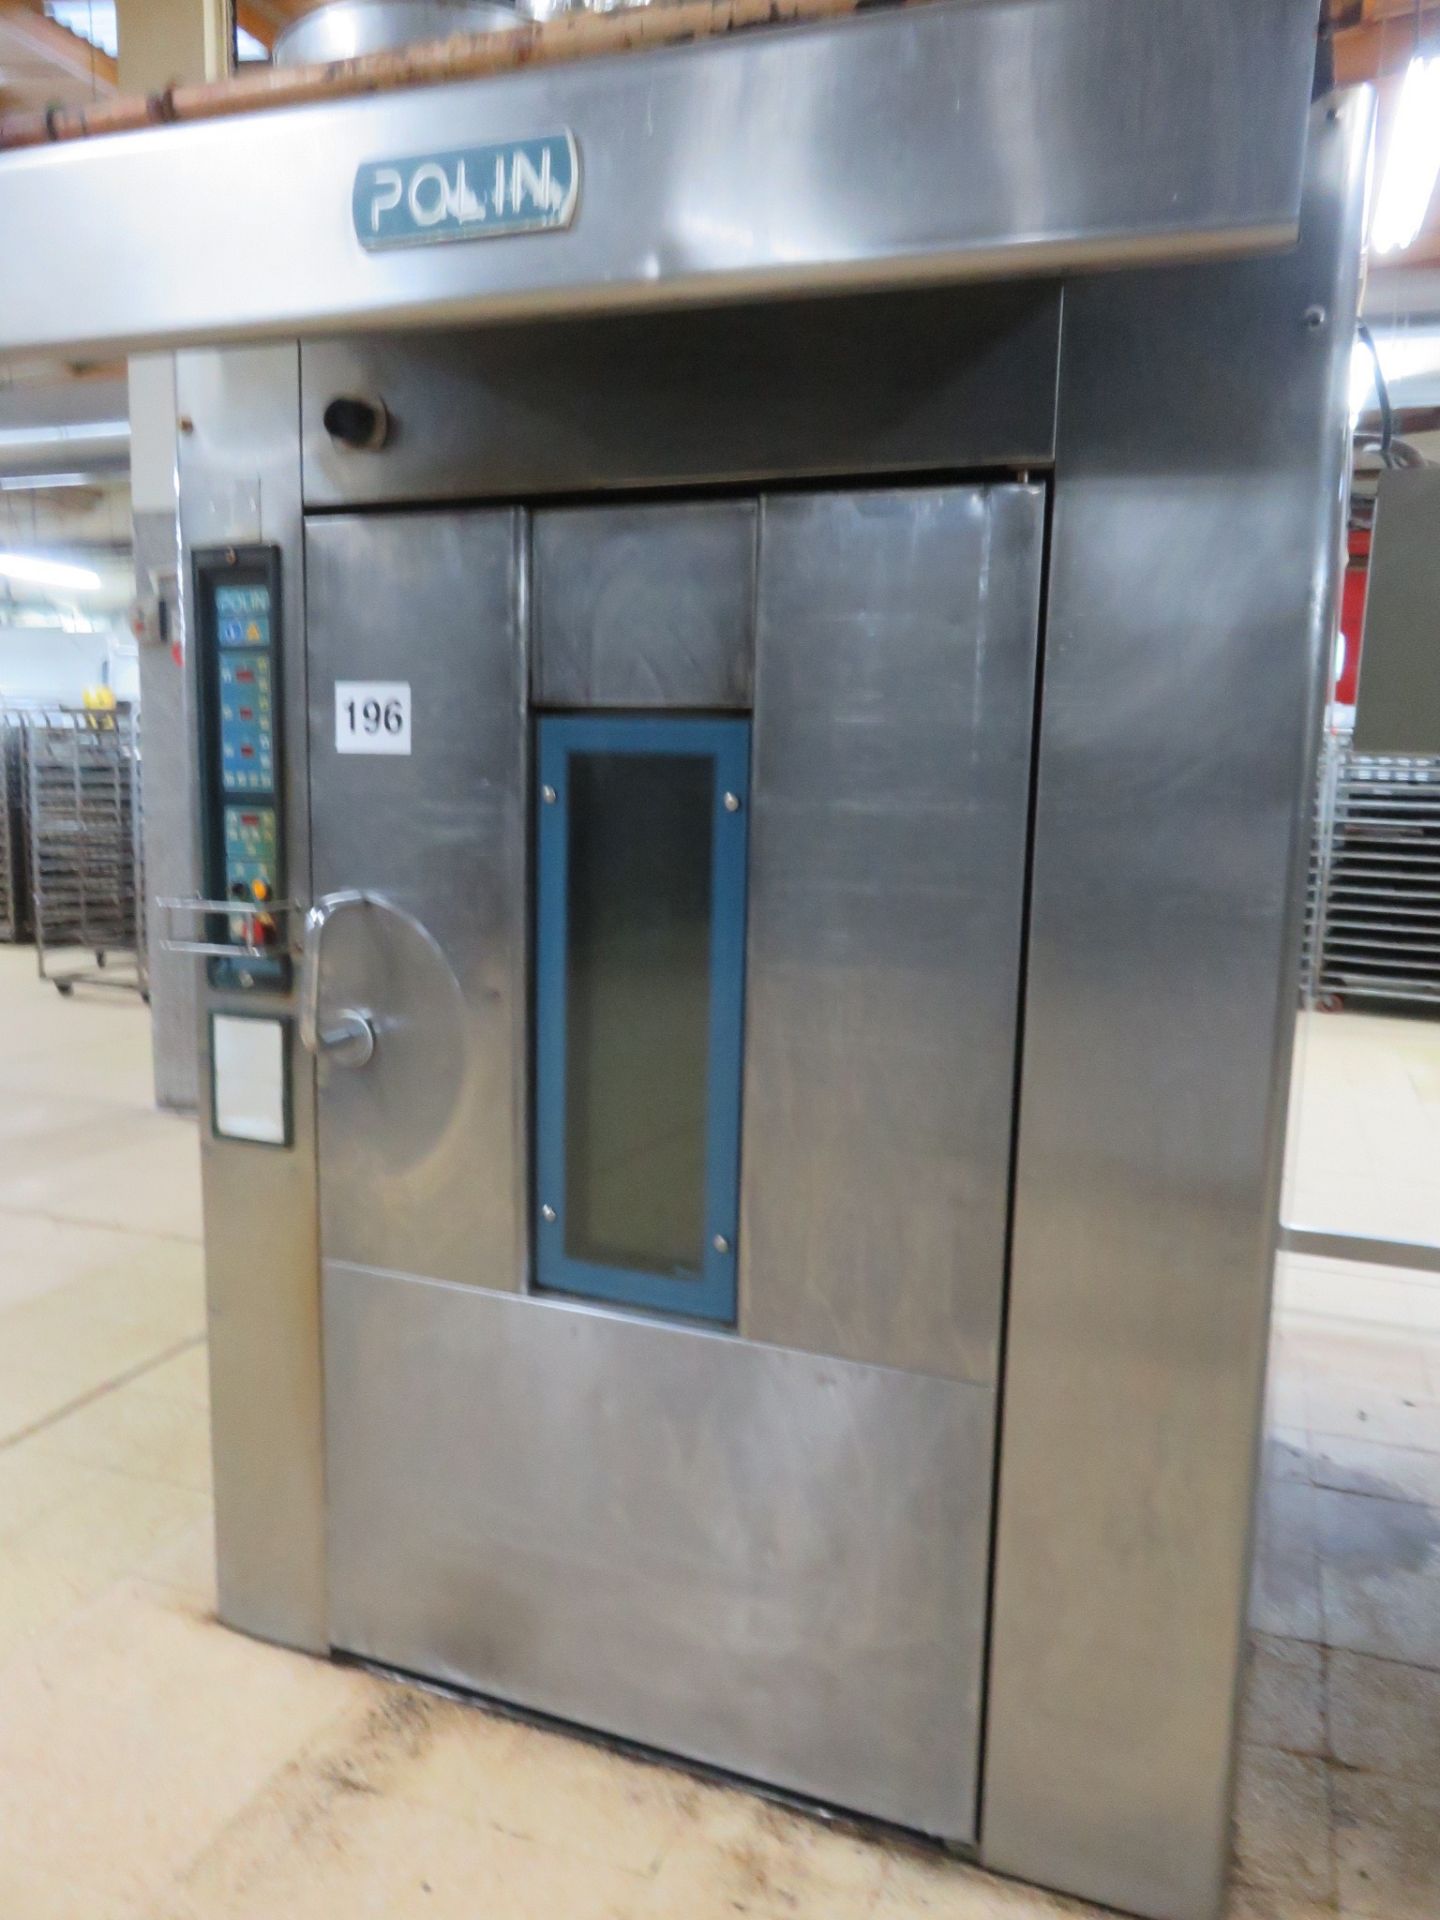 Polin S/s gas fired Oven. Takes 1 x double Rotary Rack Type B23 . Lift Out £320